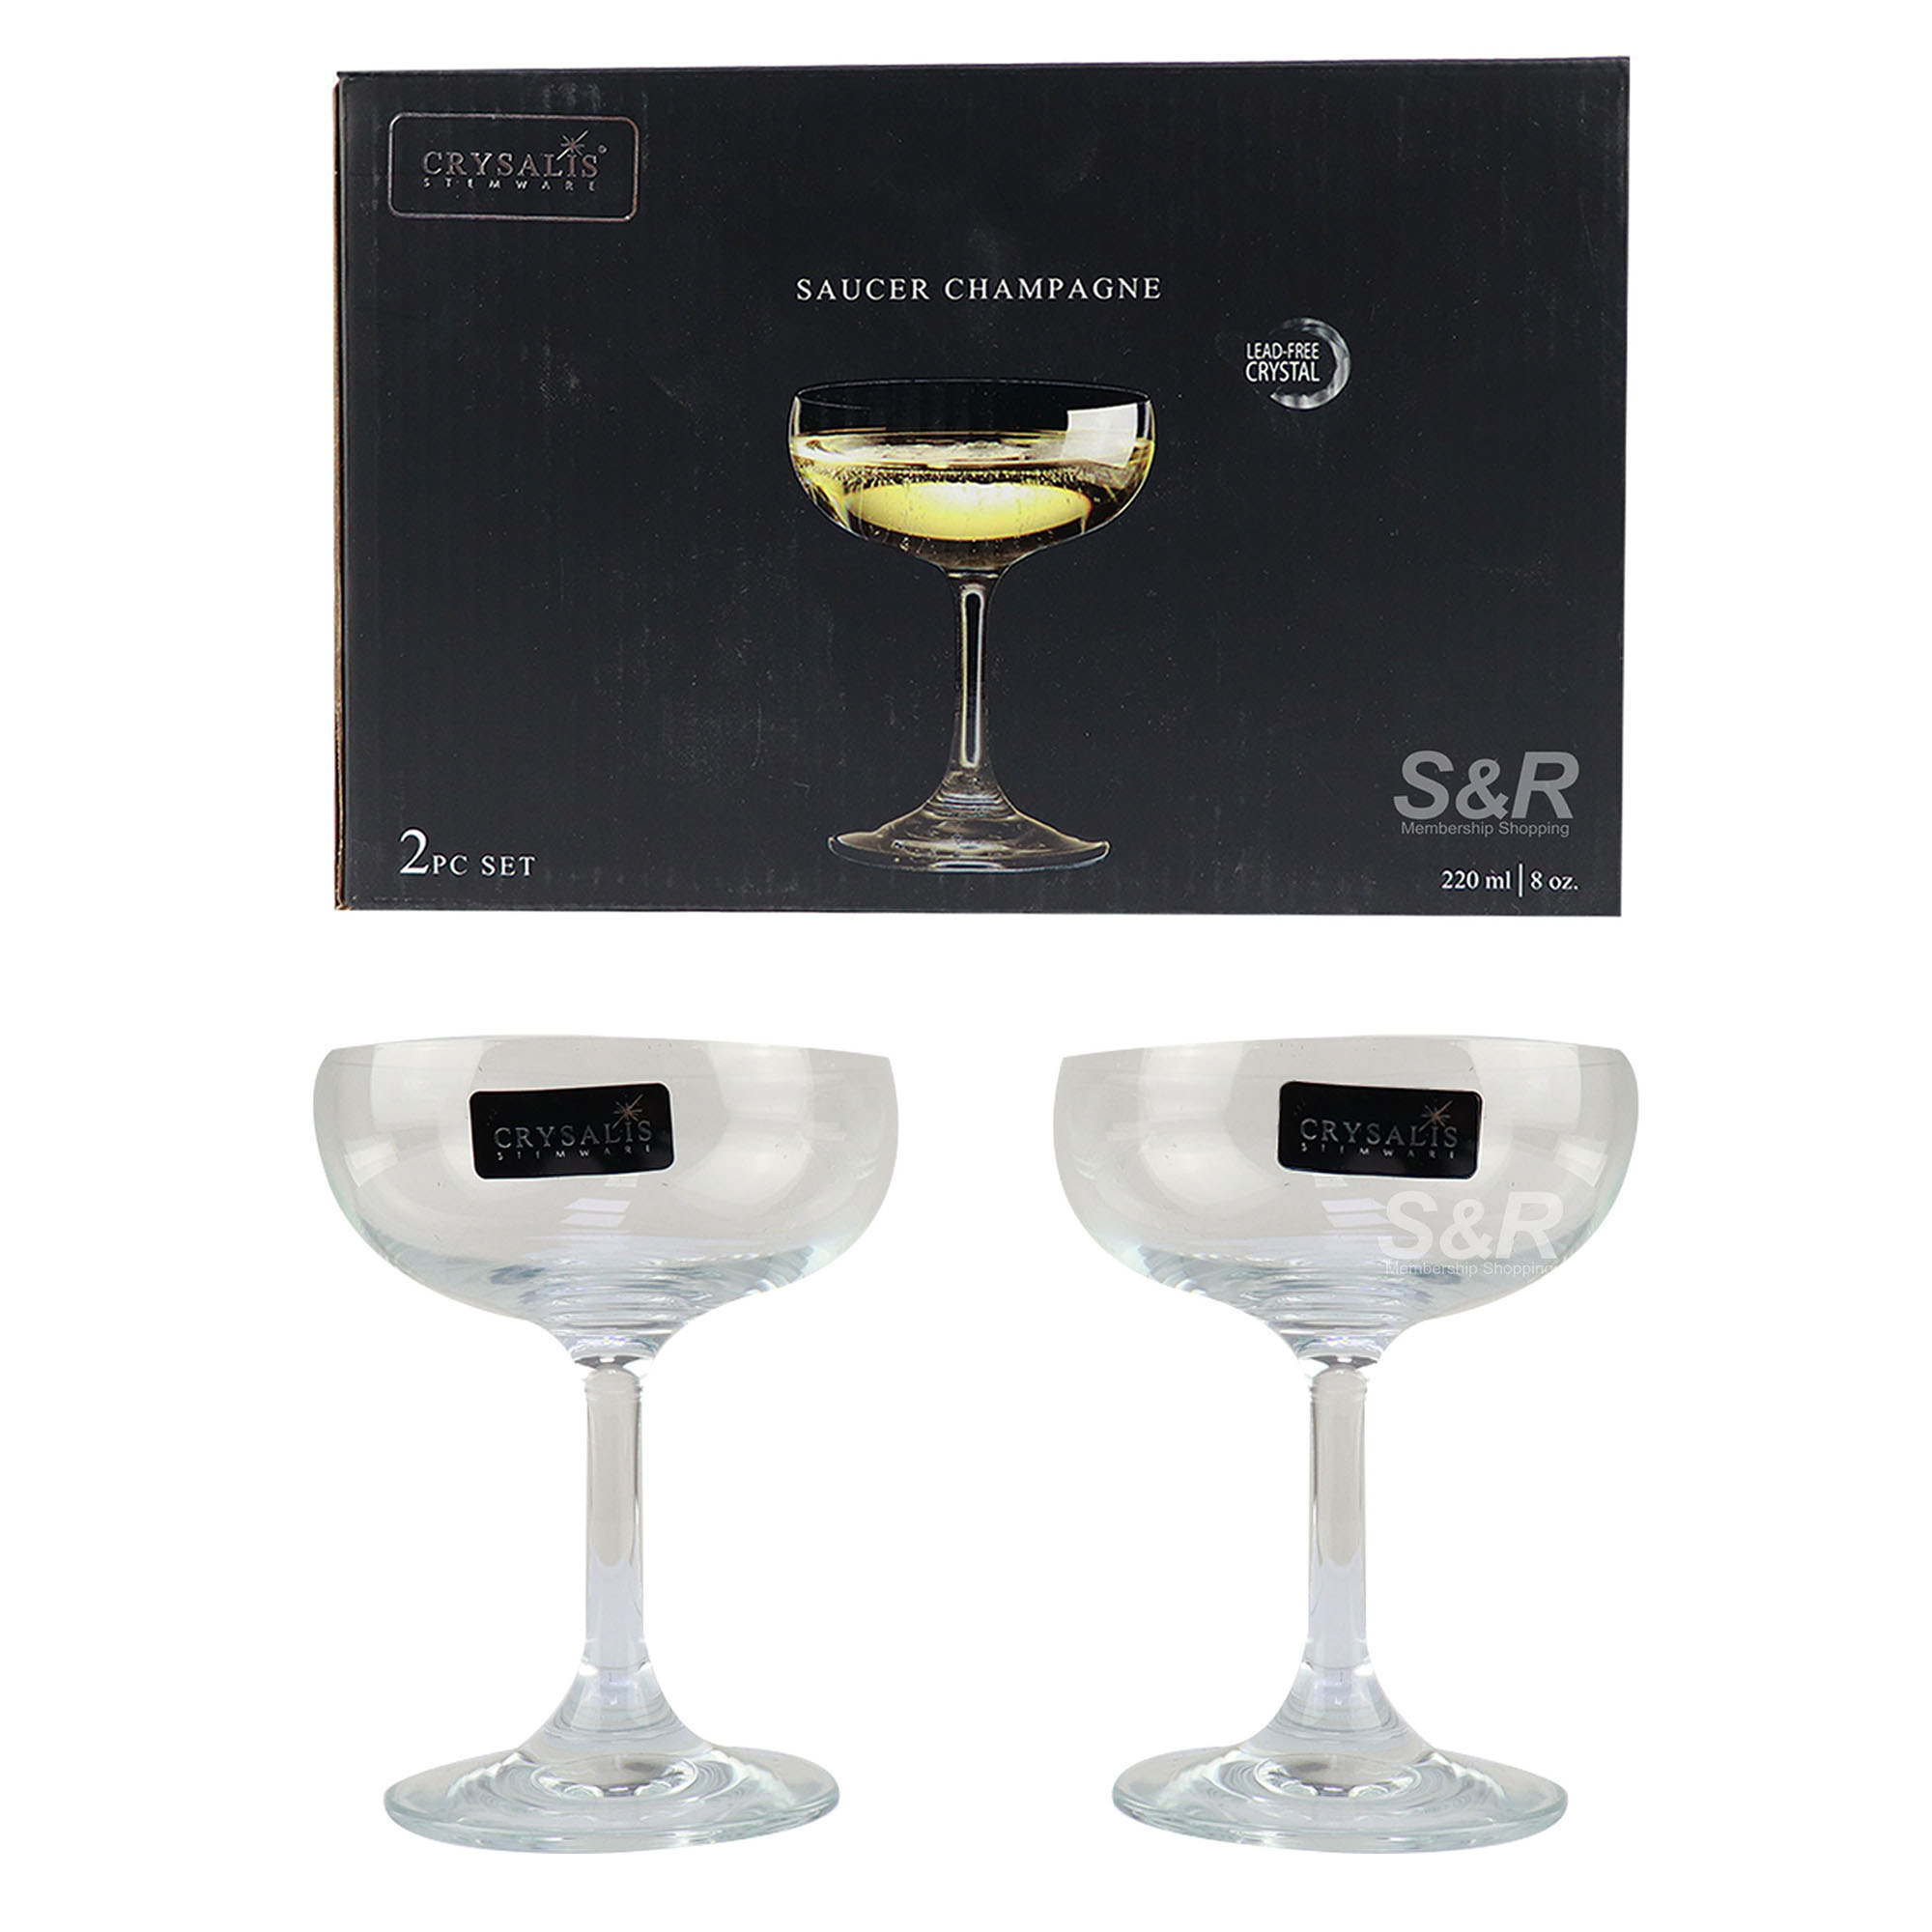 Saucer Champagne